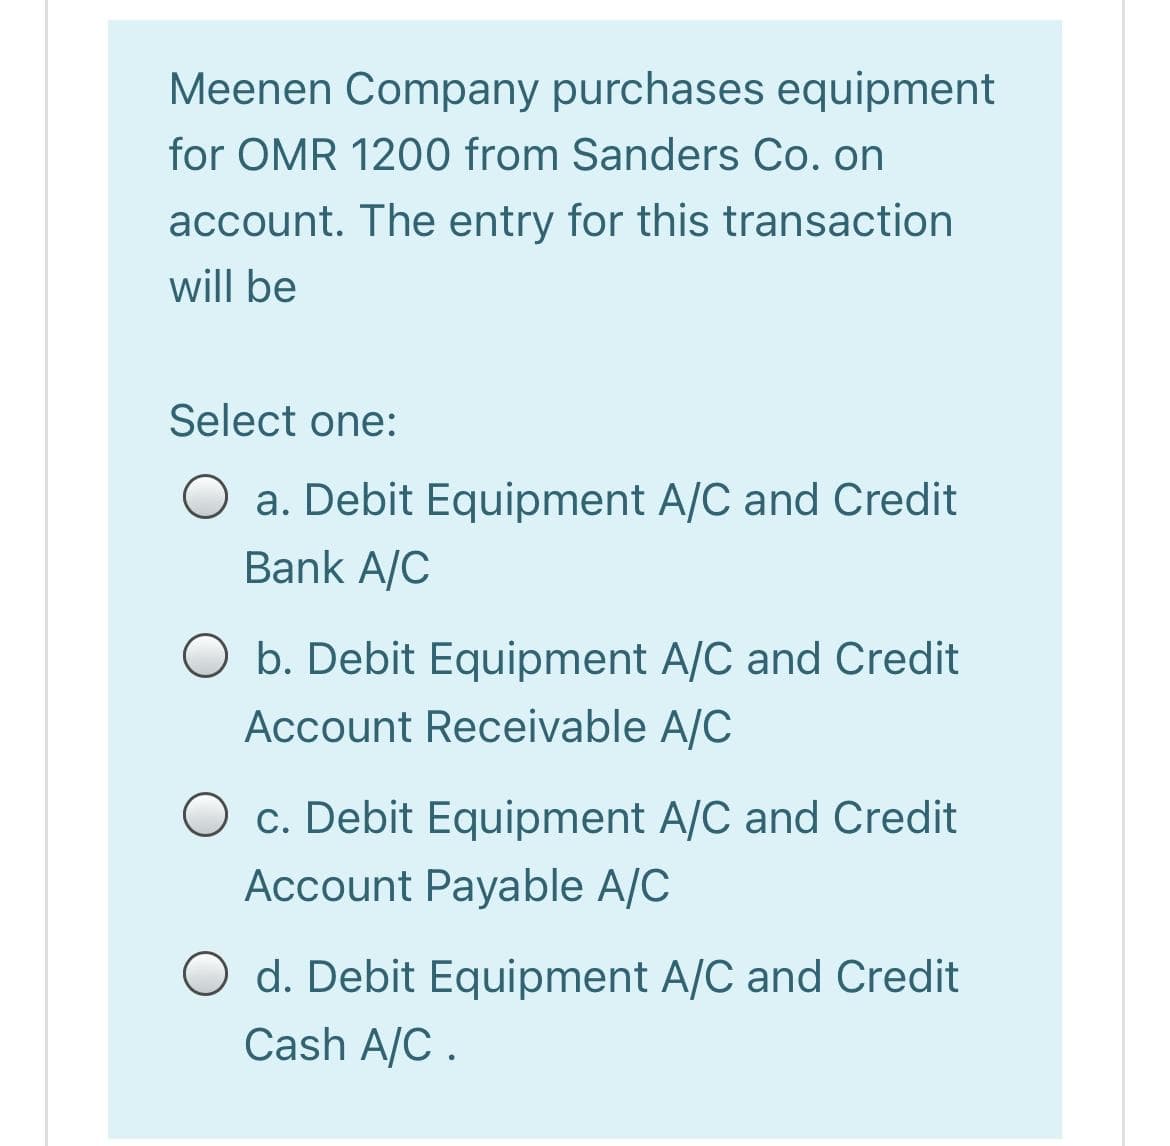 Meenen Company purchases equipment
for OMR 1200 from Sanders Co. on
account. The entry for this transaction
will be
Select one:
O a. Debit Equipment A/C and Credit
Bank A/C
O b. Debit Equipment A/C and Credit
Account Receivable A/C
O c. Debit Equipment A/C and Credit
Account Payable A/C
O d. Debit Equipment A/C and Credit
Cash A/C .
